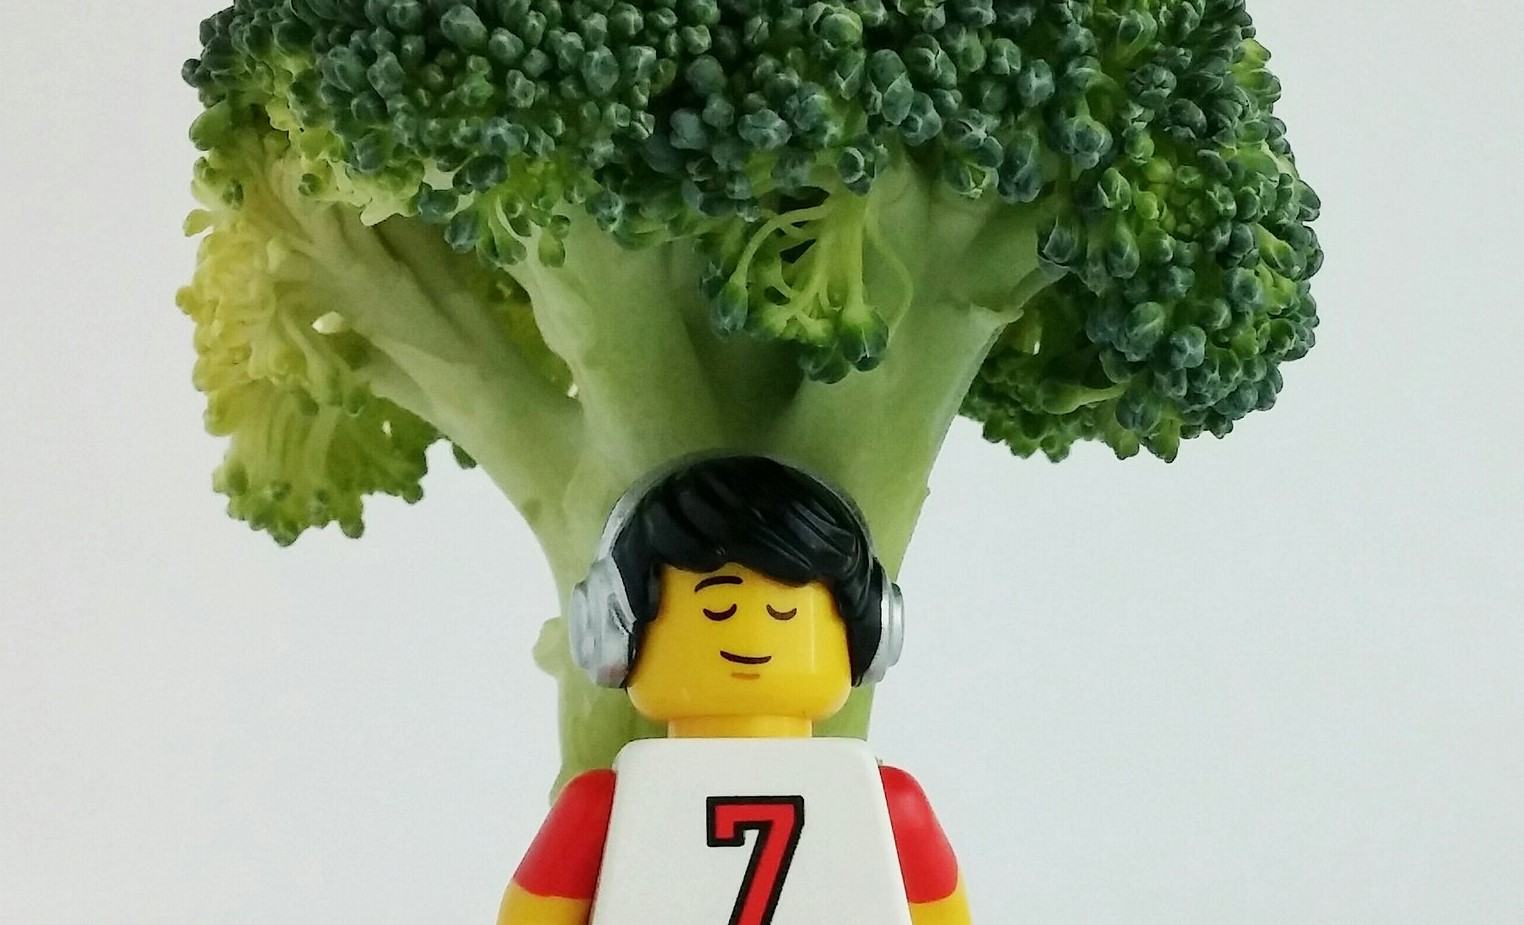 A LEGO one with his flexitarian diet.